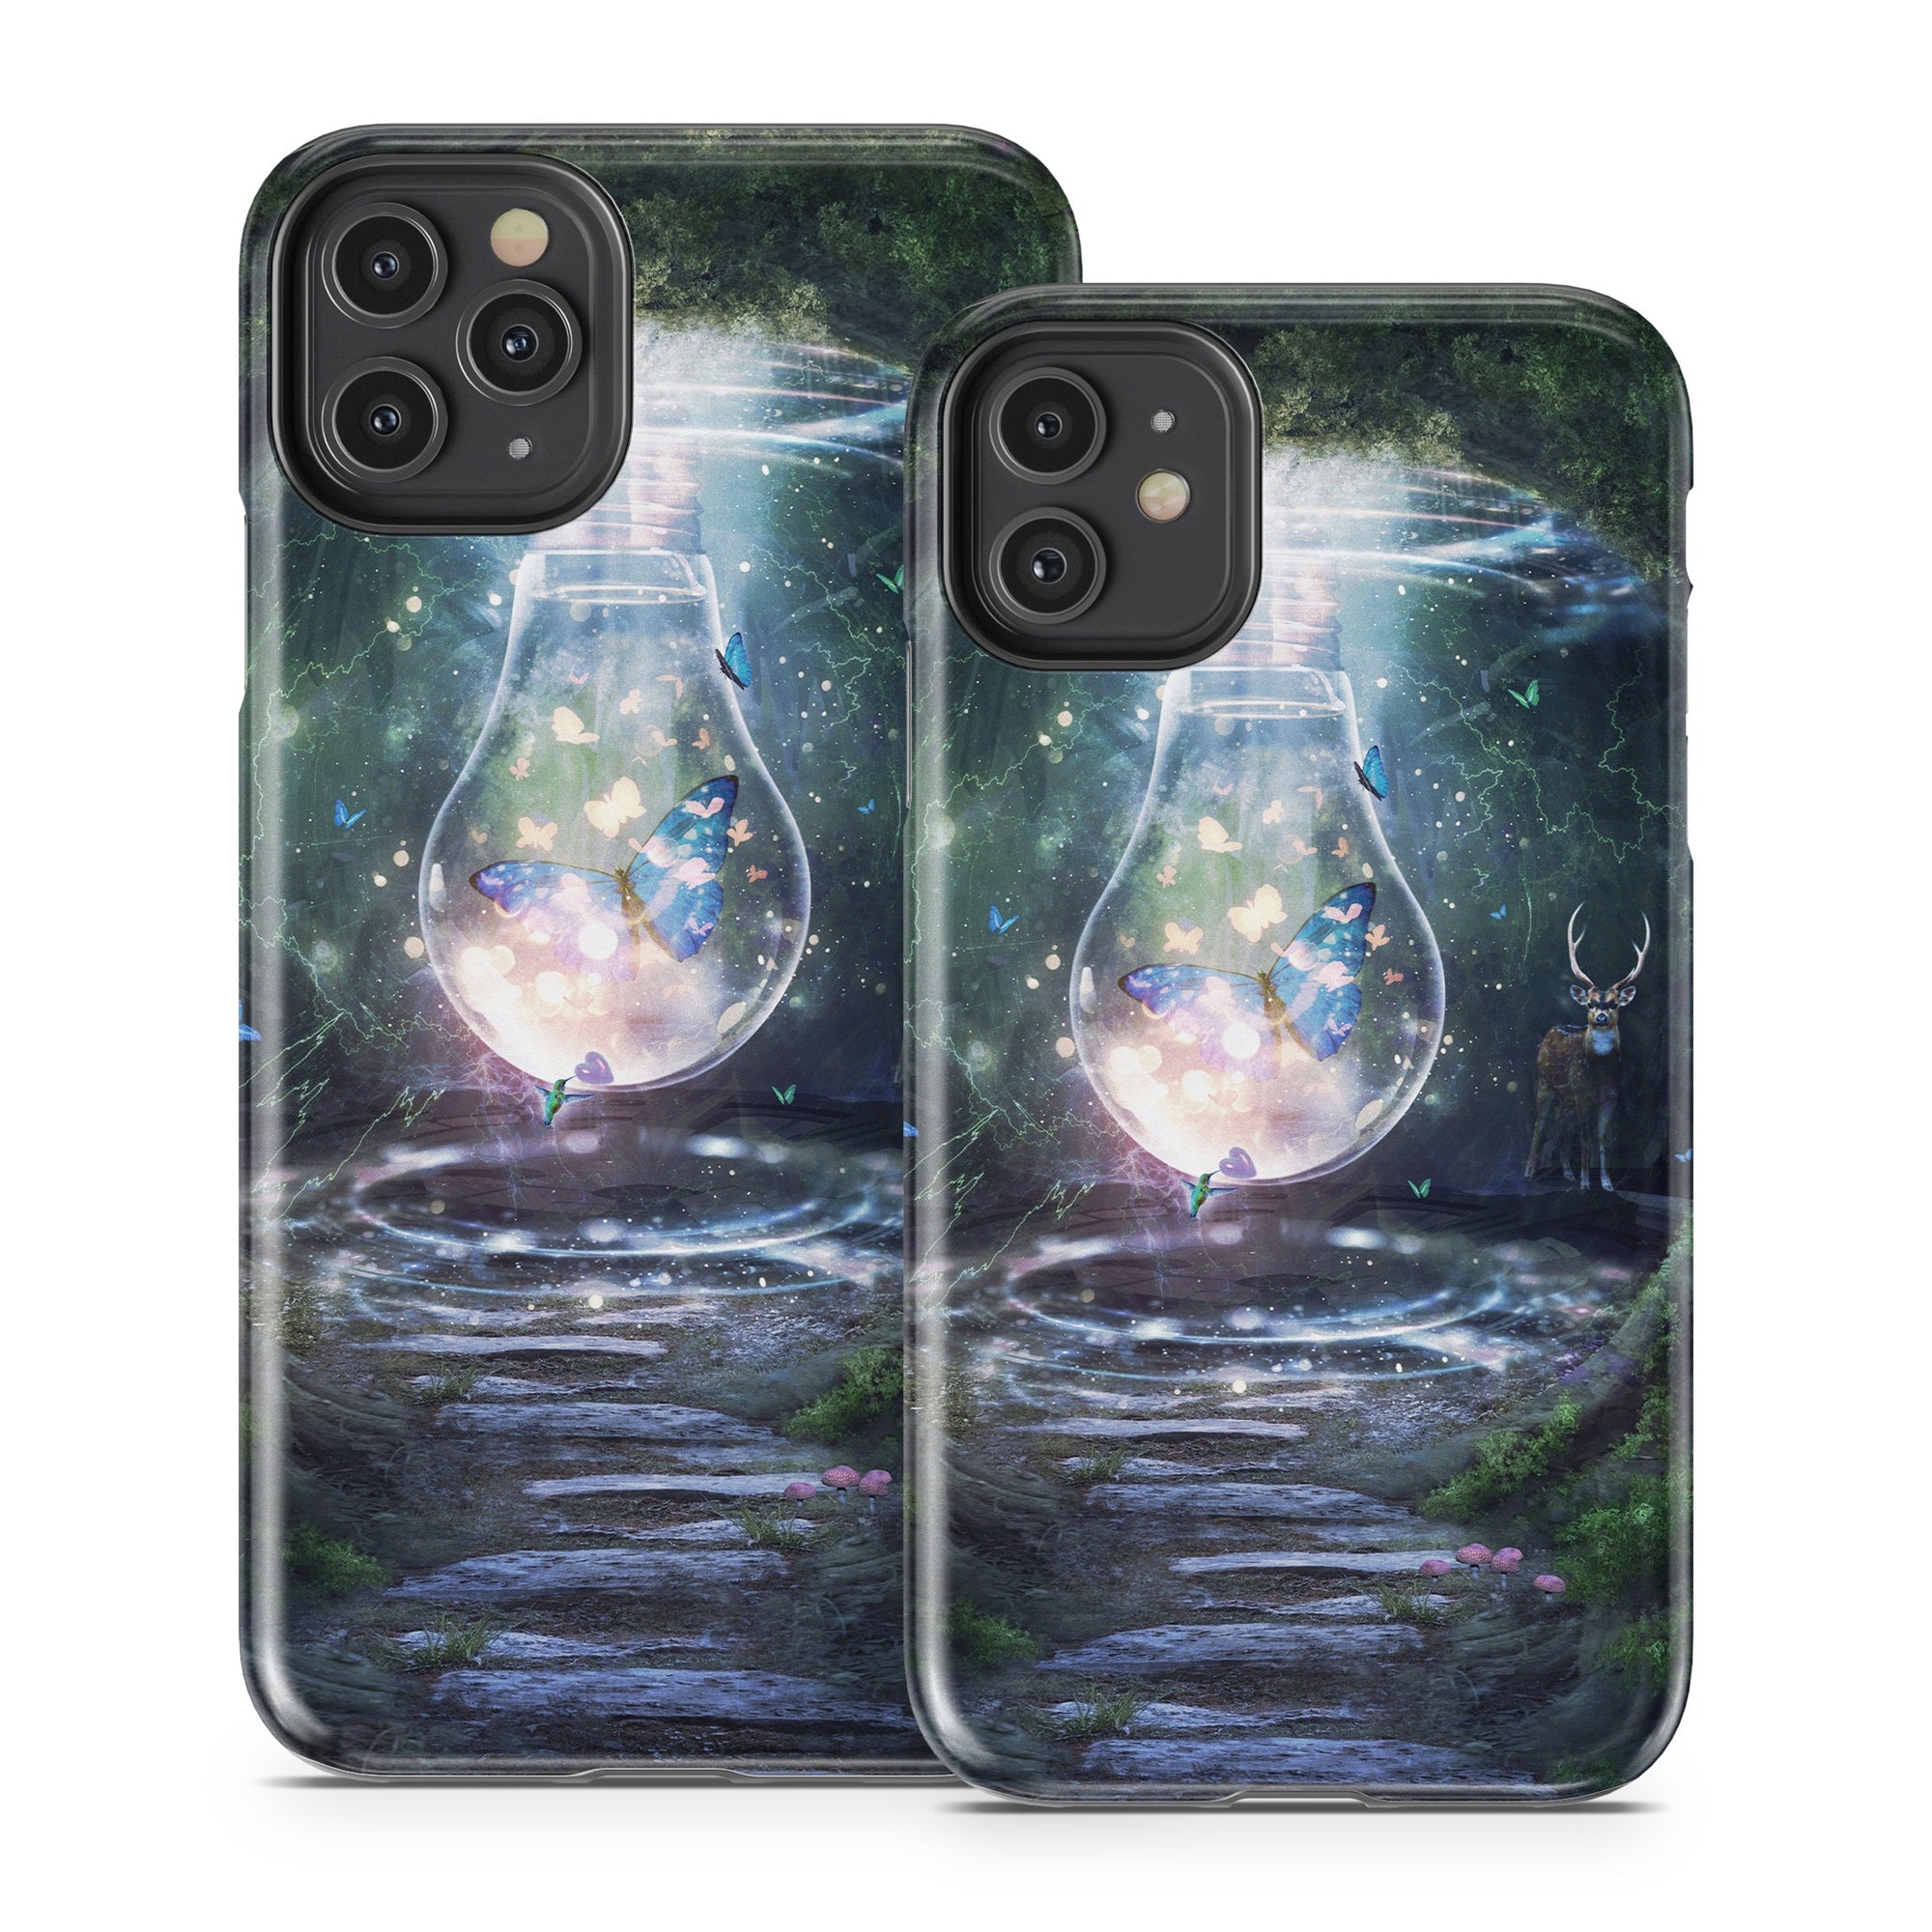 For A Moment - Apple iPhone 11 Tough Case